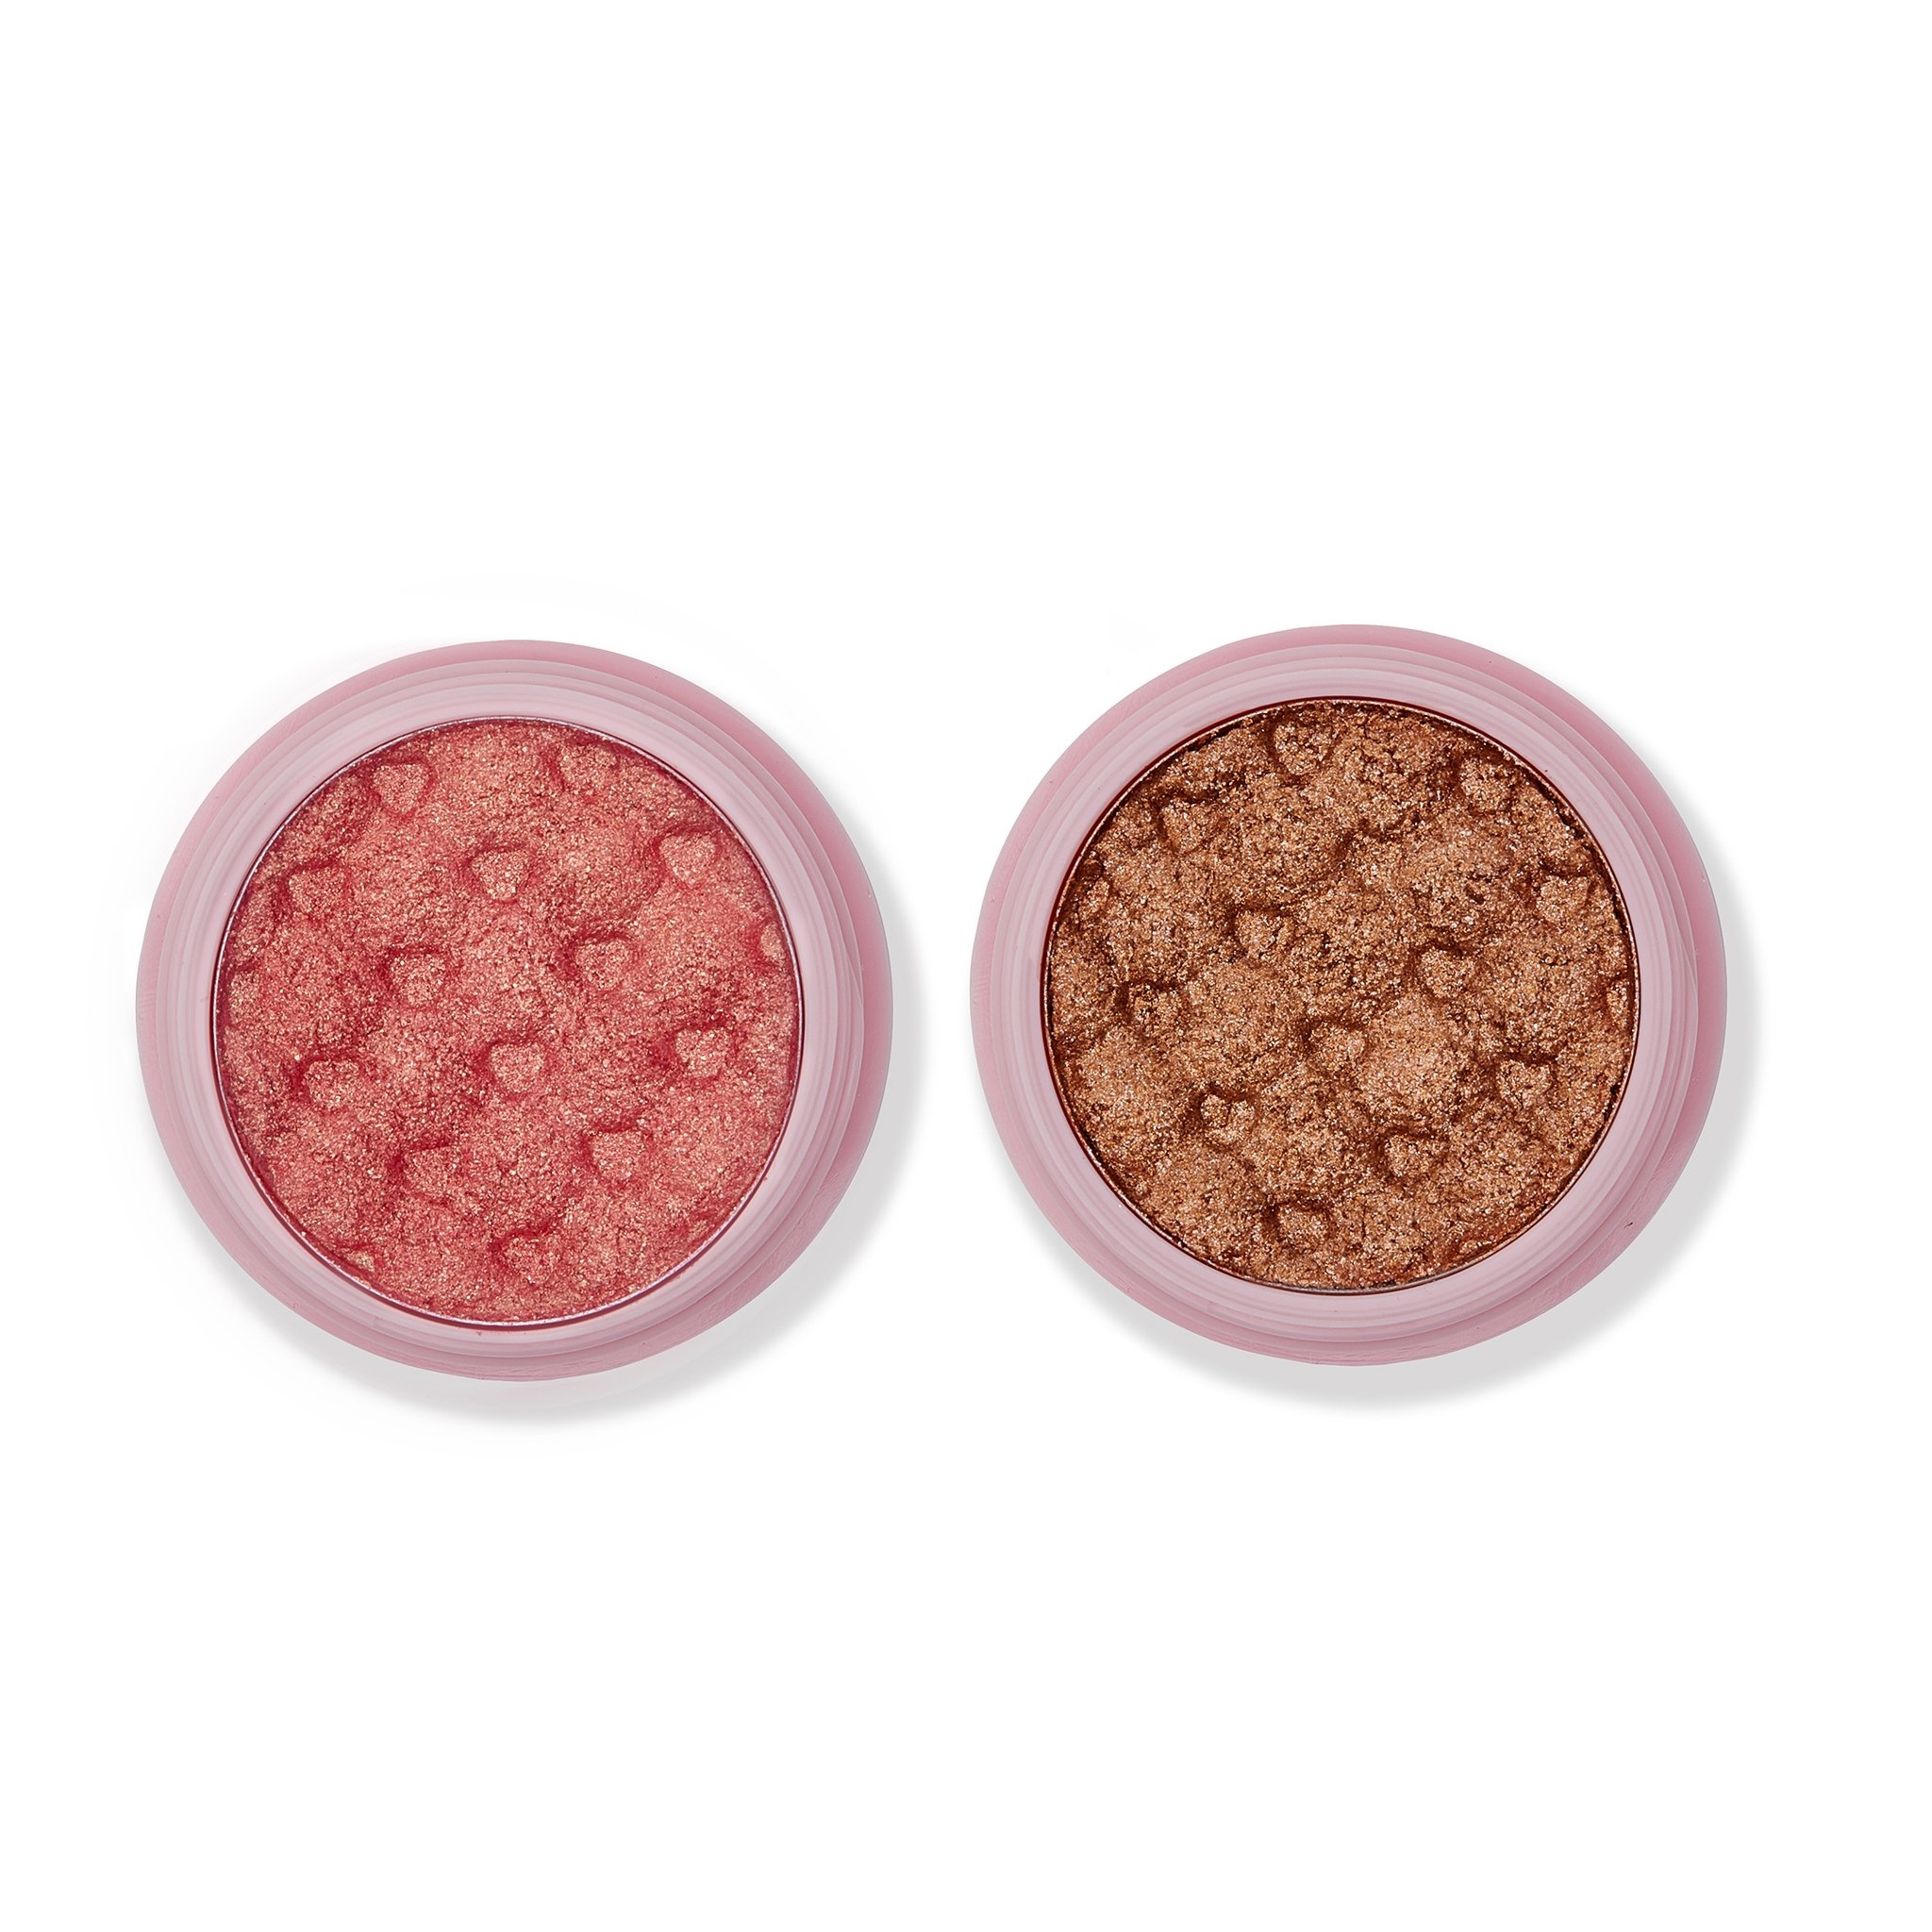 Ace Beaute Glimmer Shadow Duo Set Monolith Beauty Lifestyle